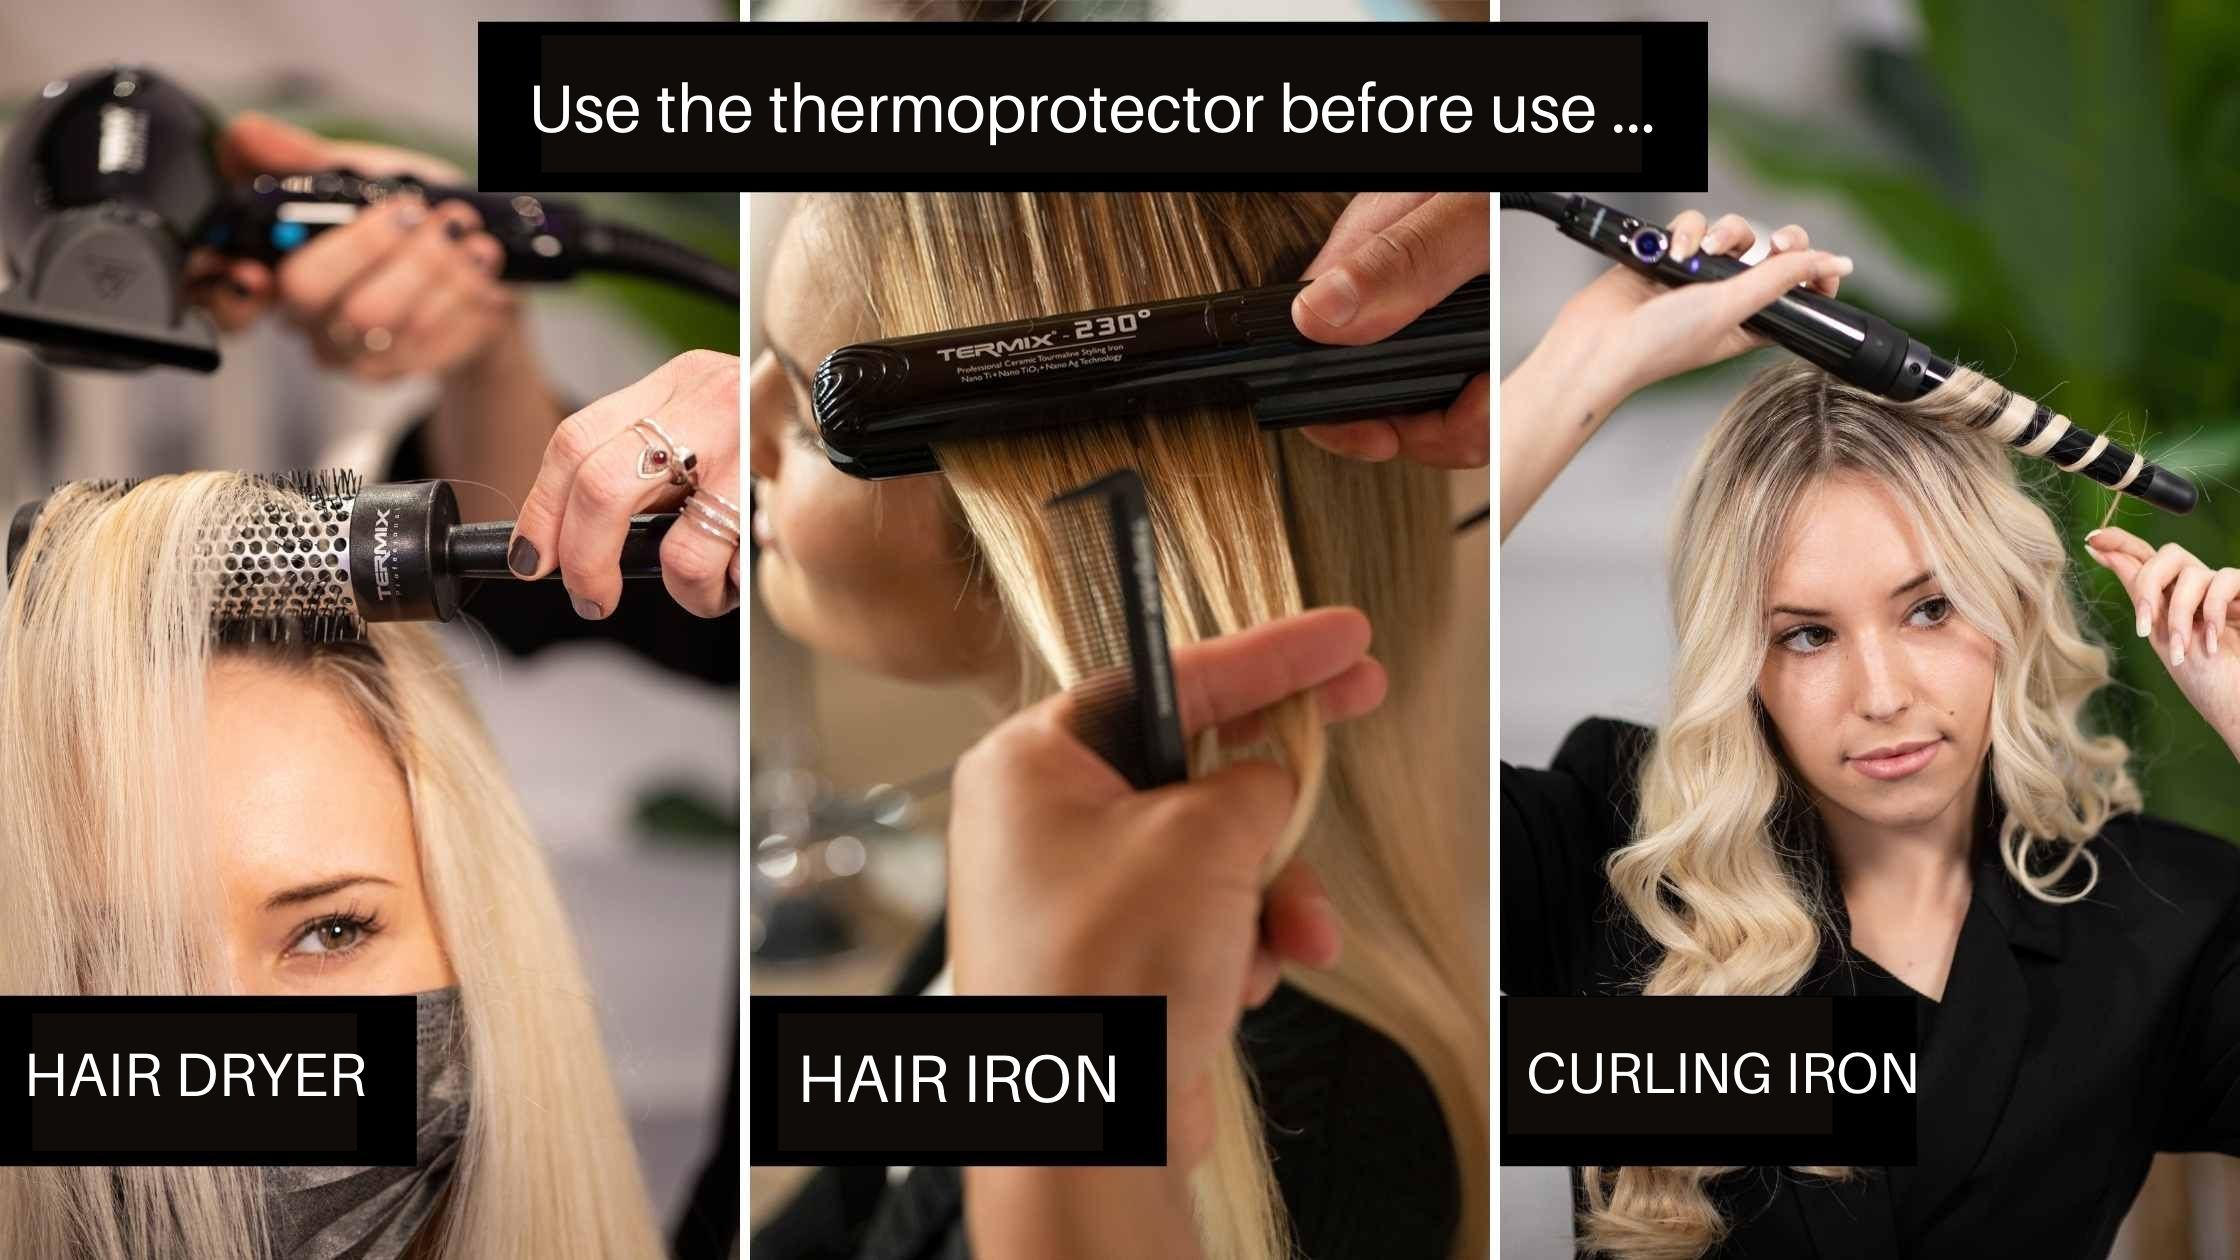  Use a thermoprotective spray before using the dryer, the iron or the curling iron